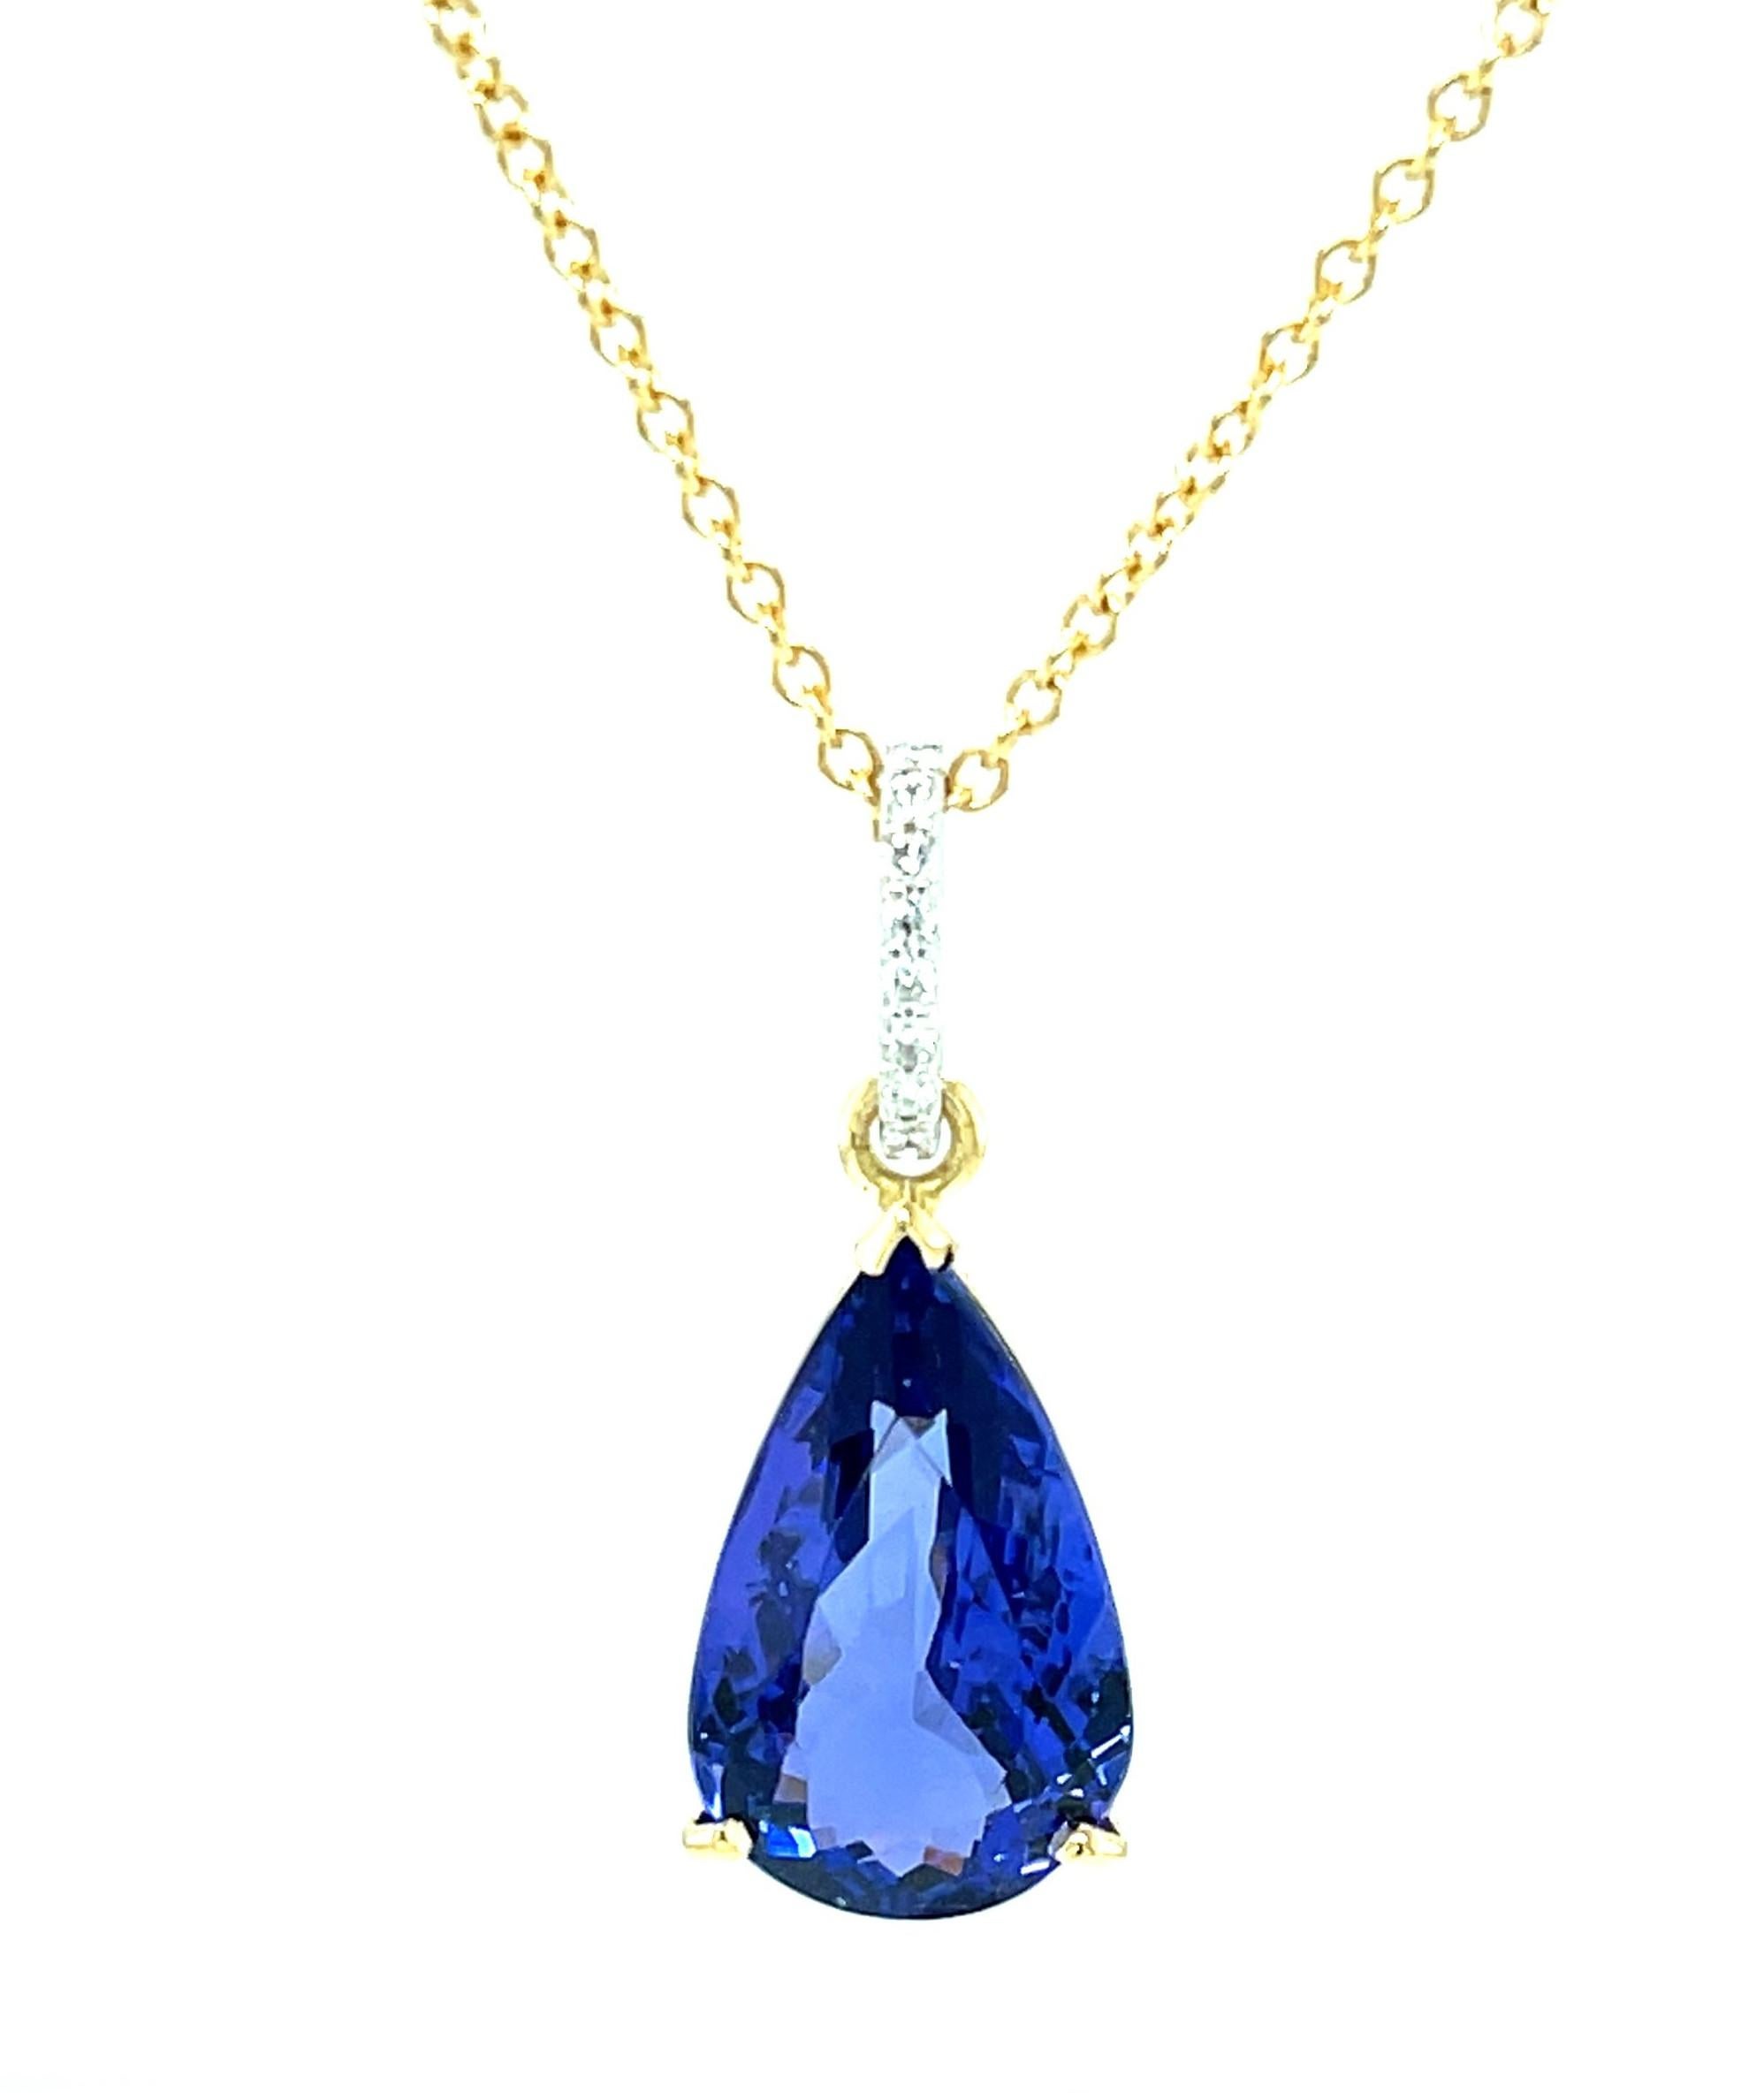 This gorgeous necklace features a fine, 8.90 carat tanzanite with perfect bluish purple color! The pear-shaped tanzanite is set in an 18k yellow gold basket that was custom-made especially for this gem. Brilliant white diamonds have been set in the